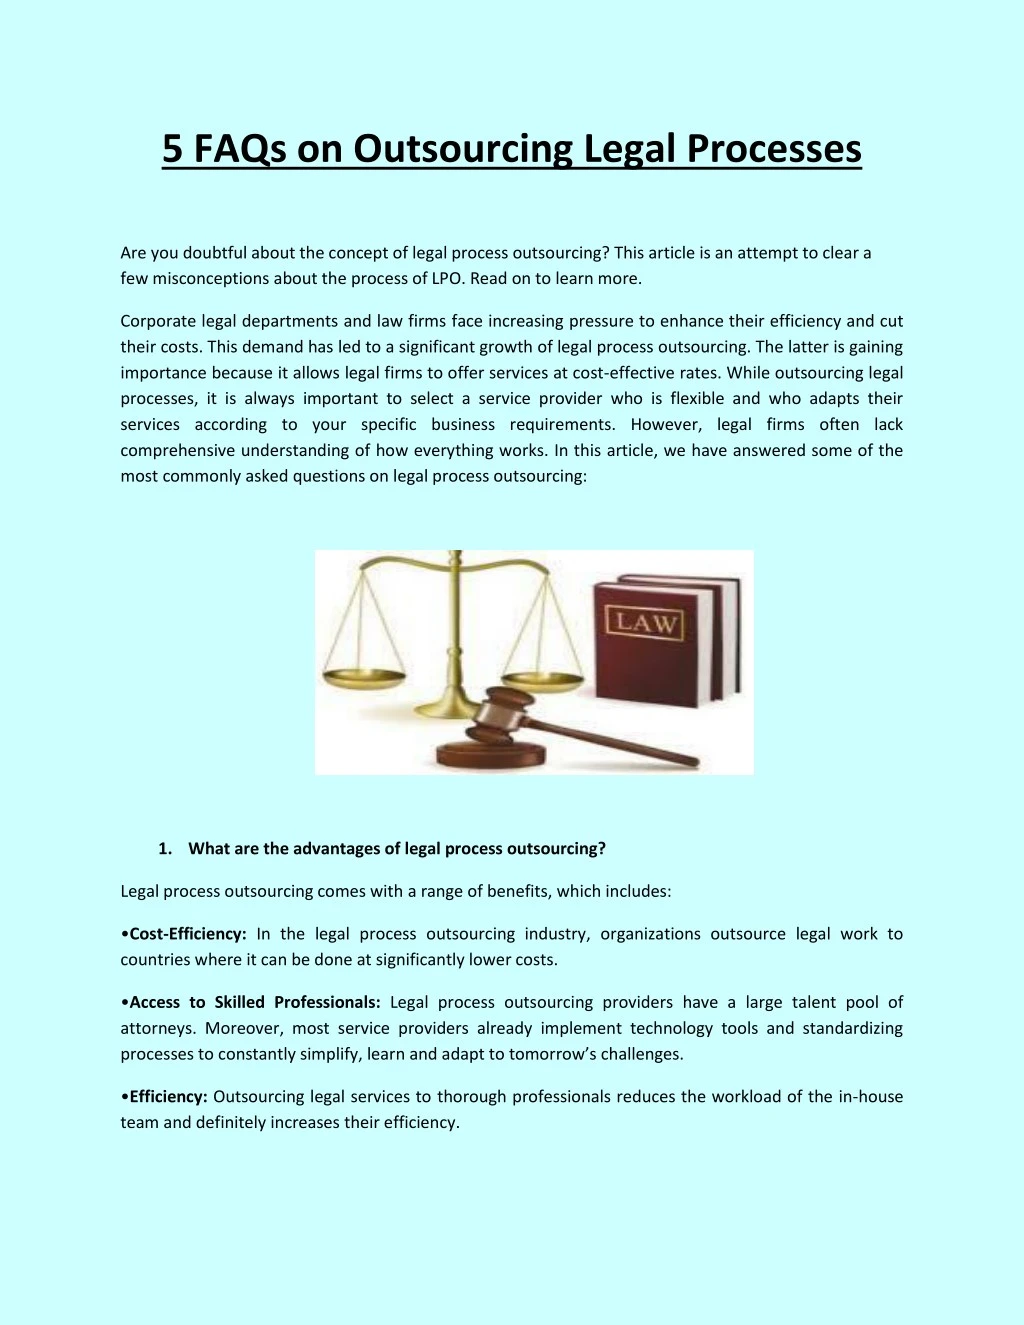 5 faqs on outsourcing legal processes